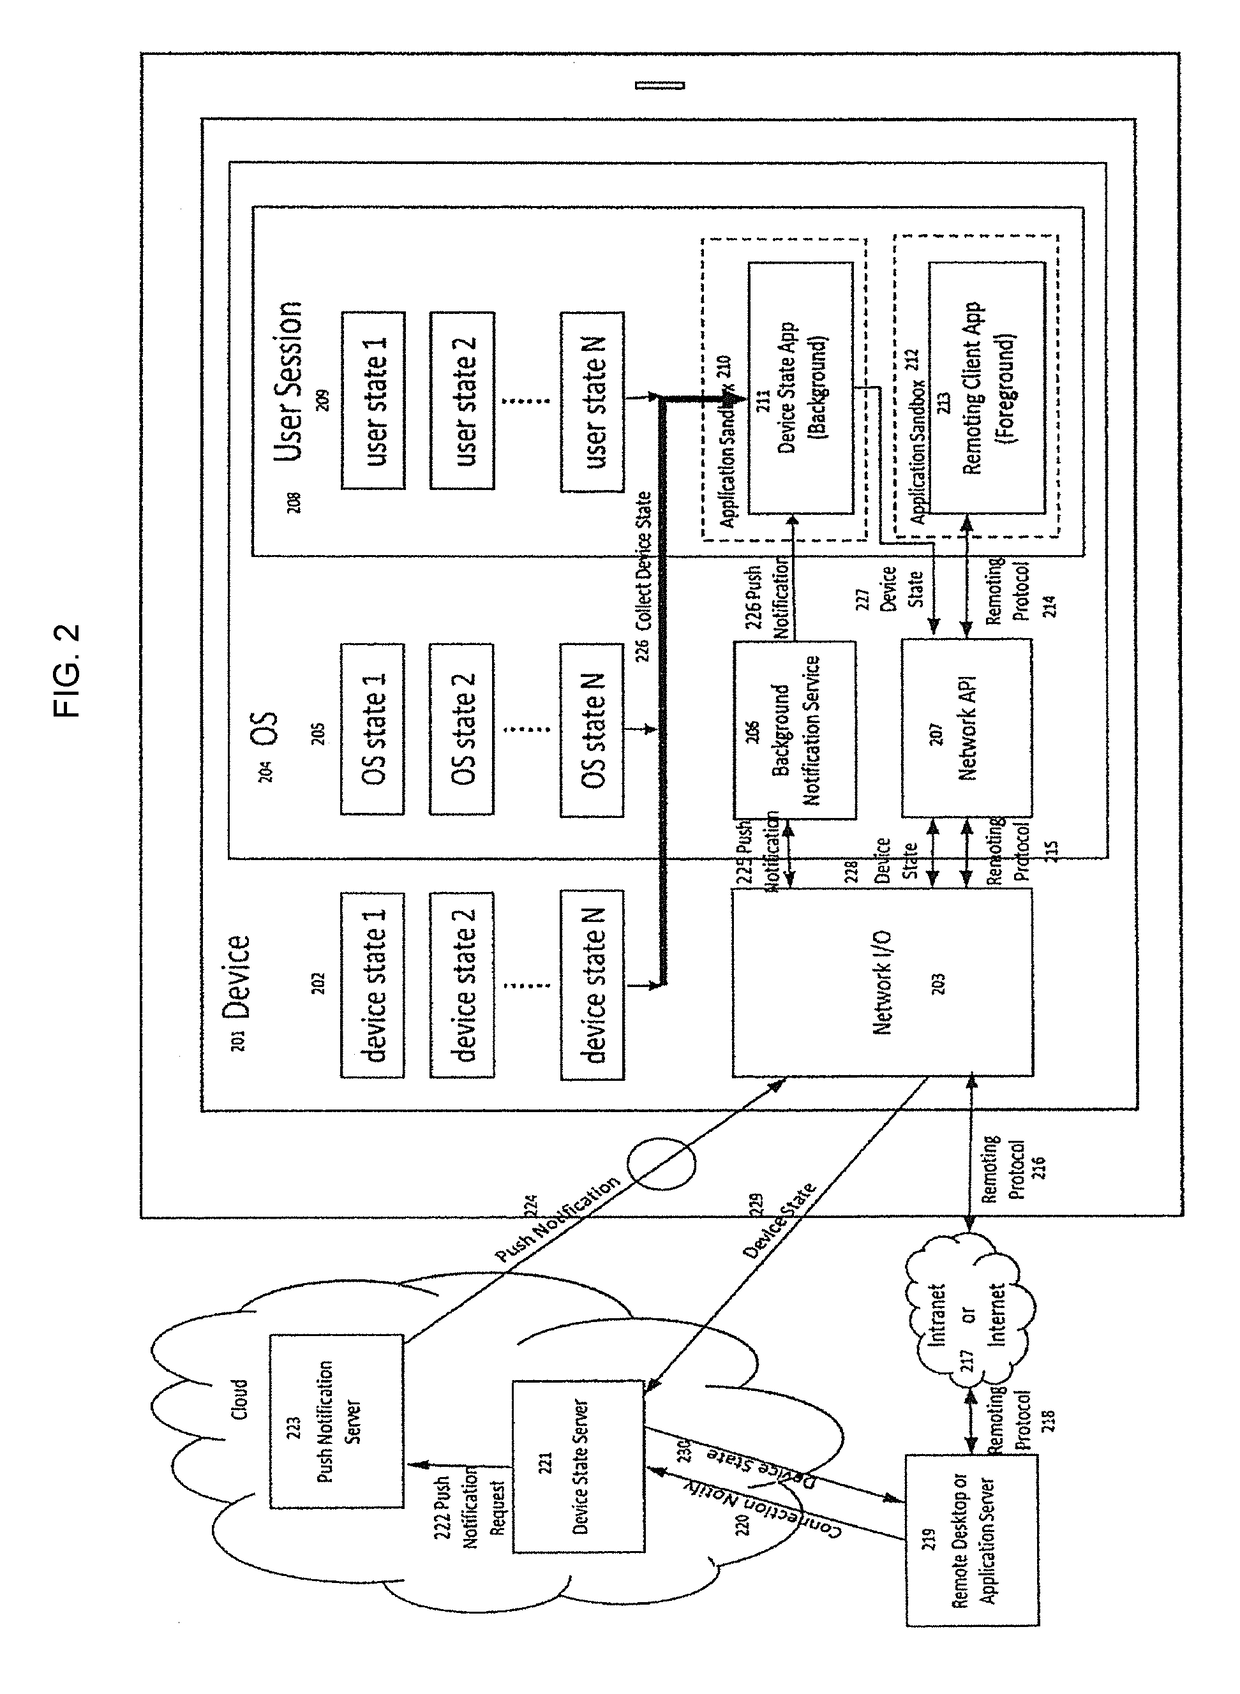 Method and system for controlling remote session on computer systems